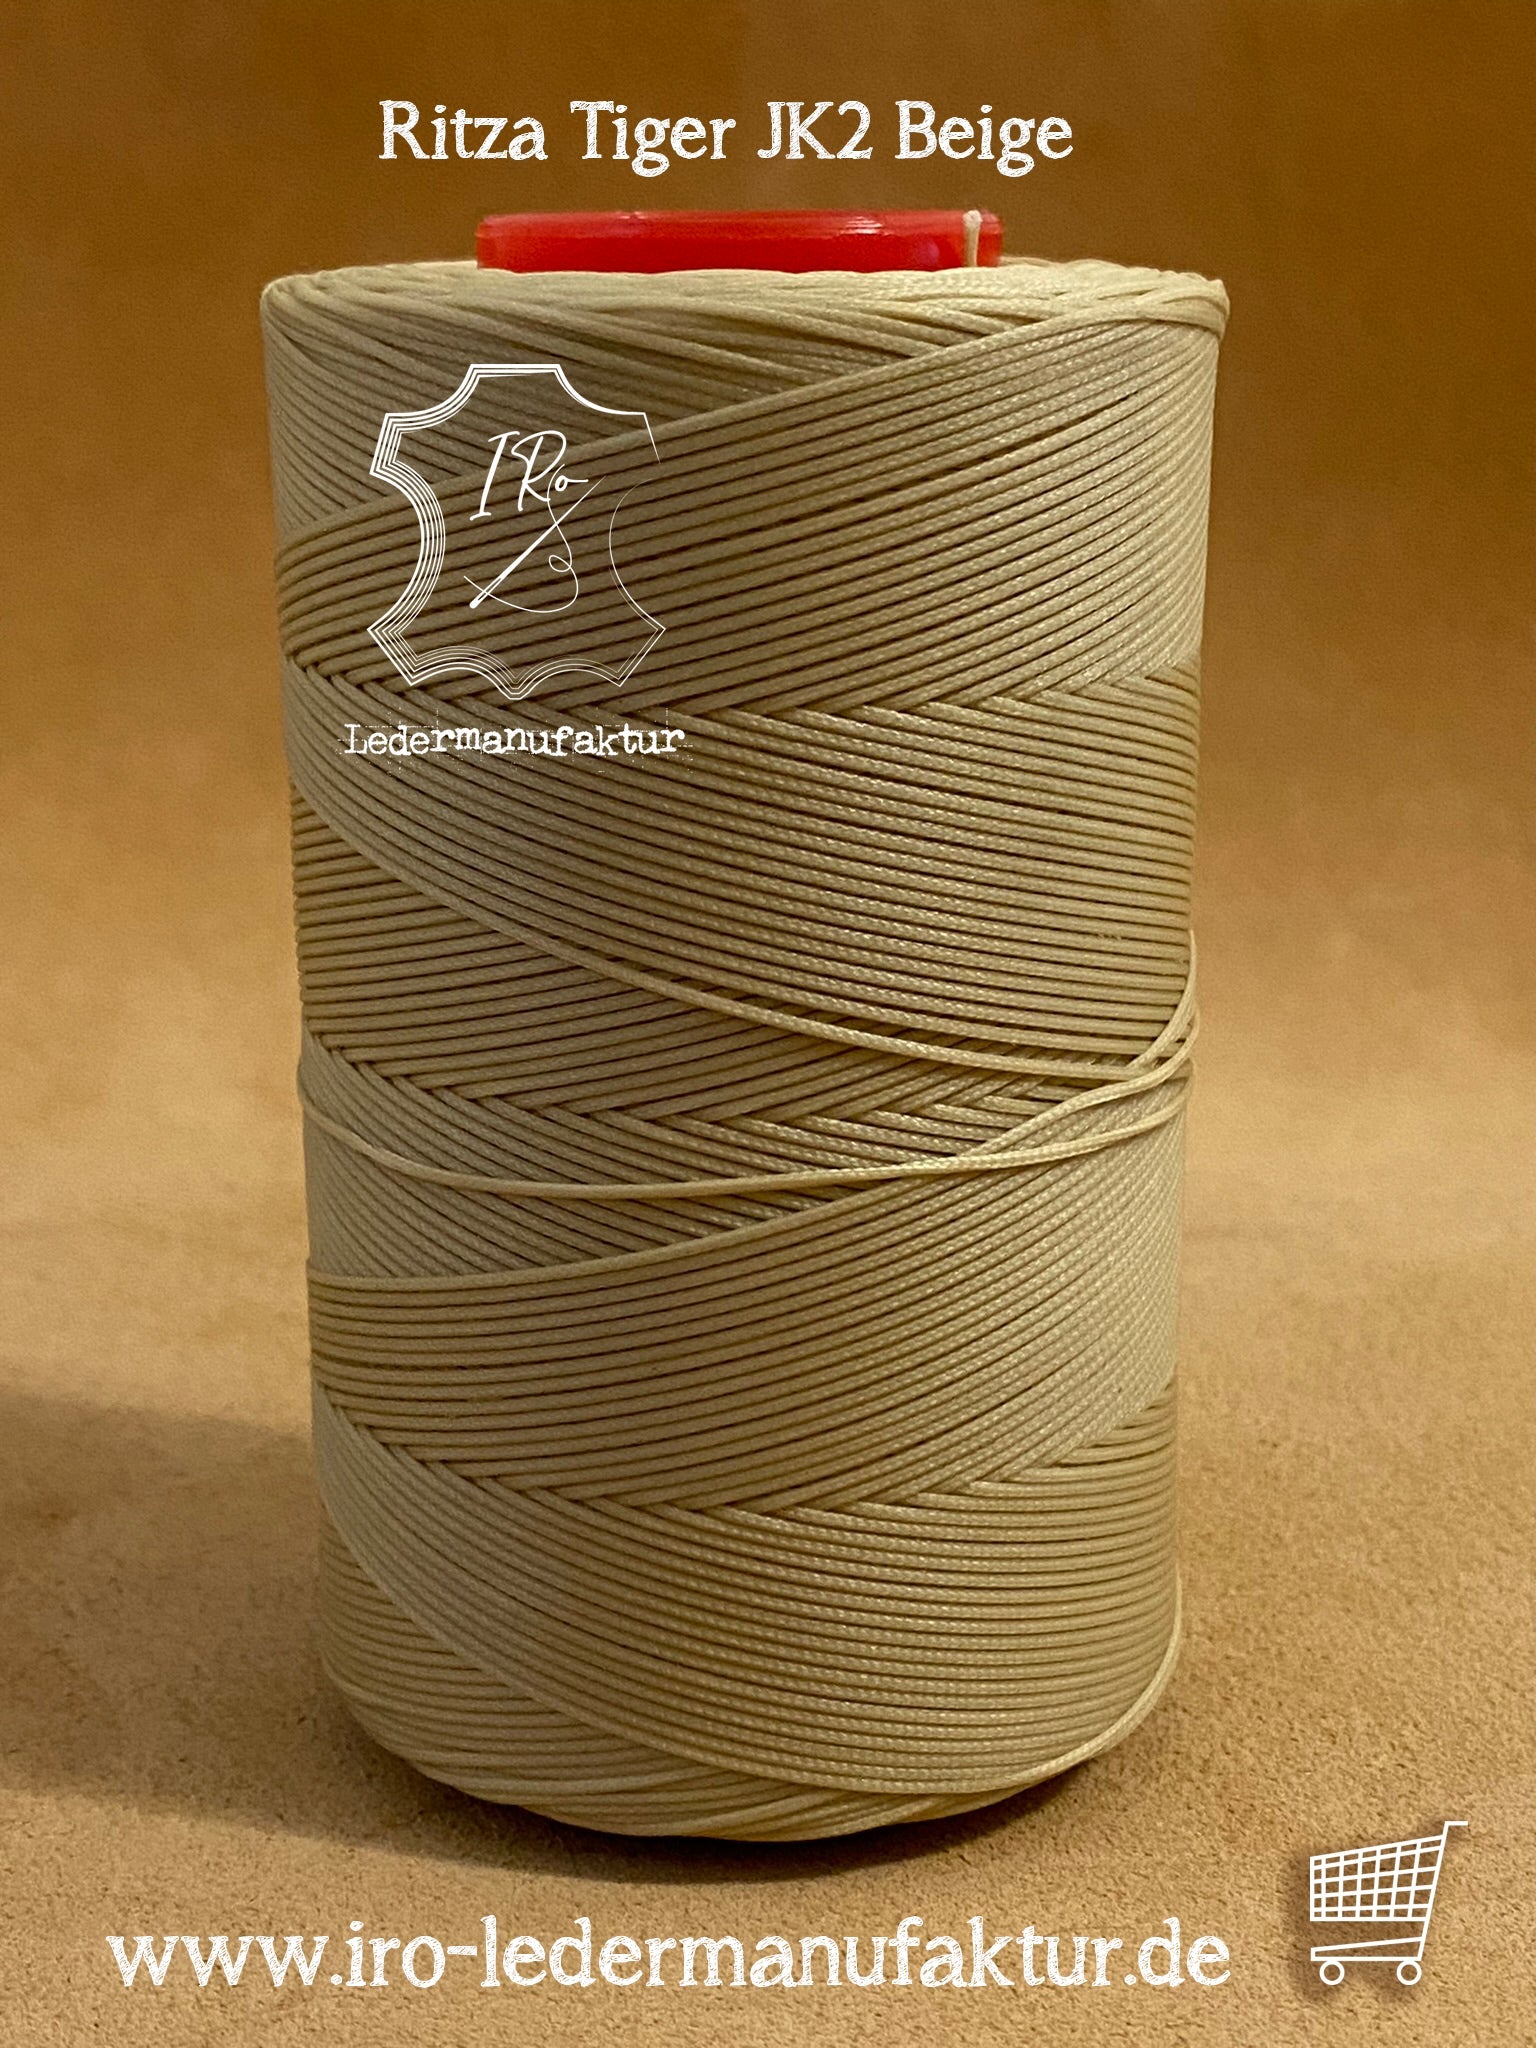 0.6mm Black Ritza 25 Tiger Wax Thread For Hand Sewing. 25 - 1000m length  (50m)